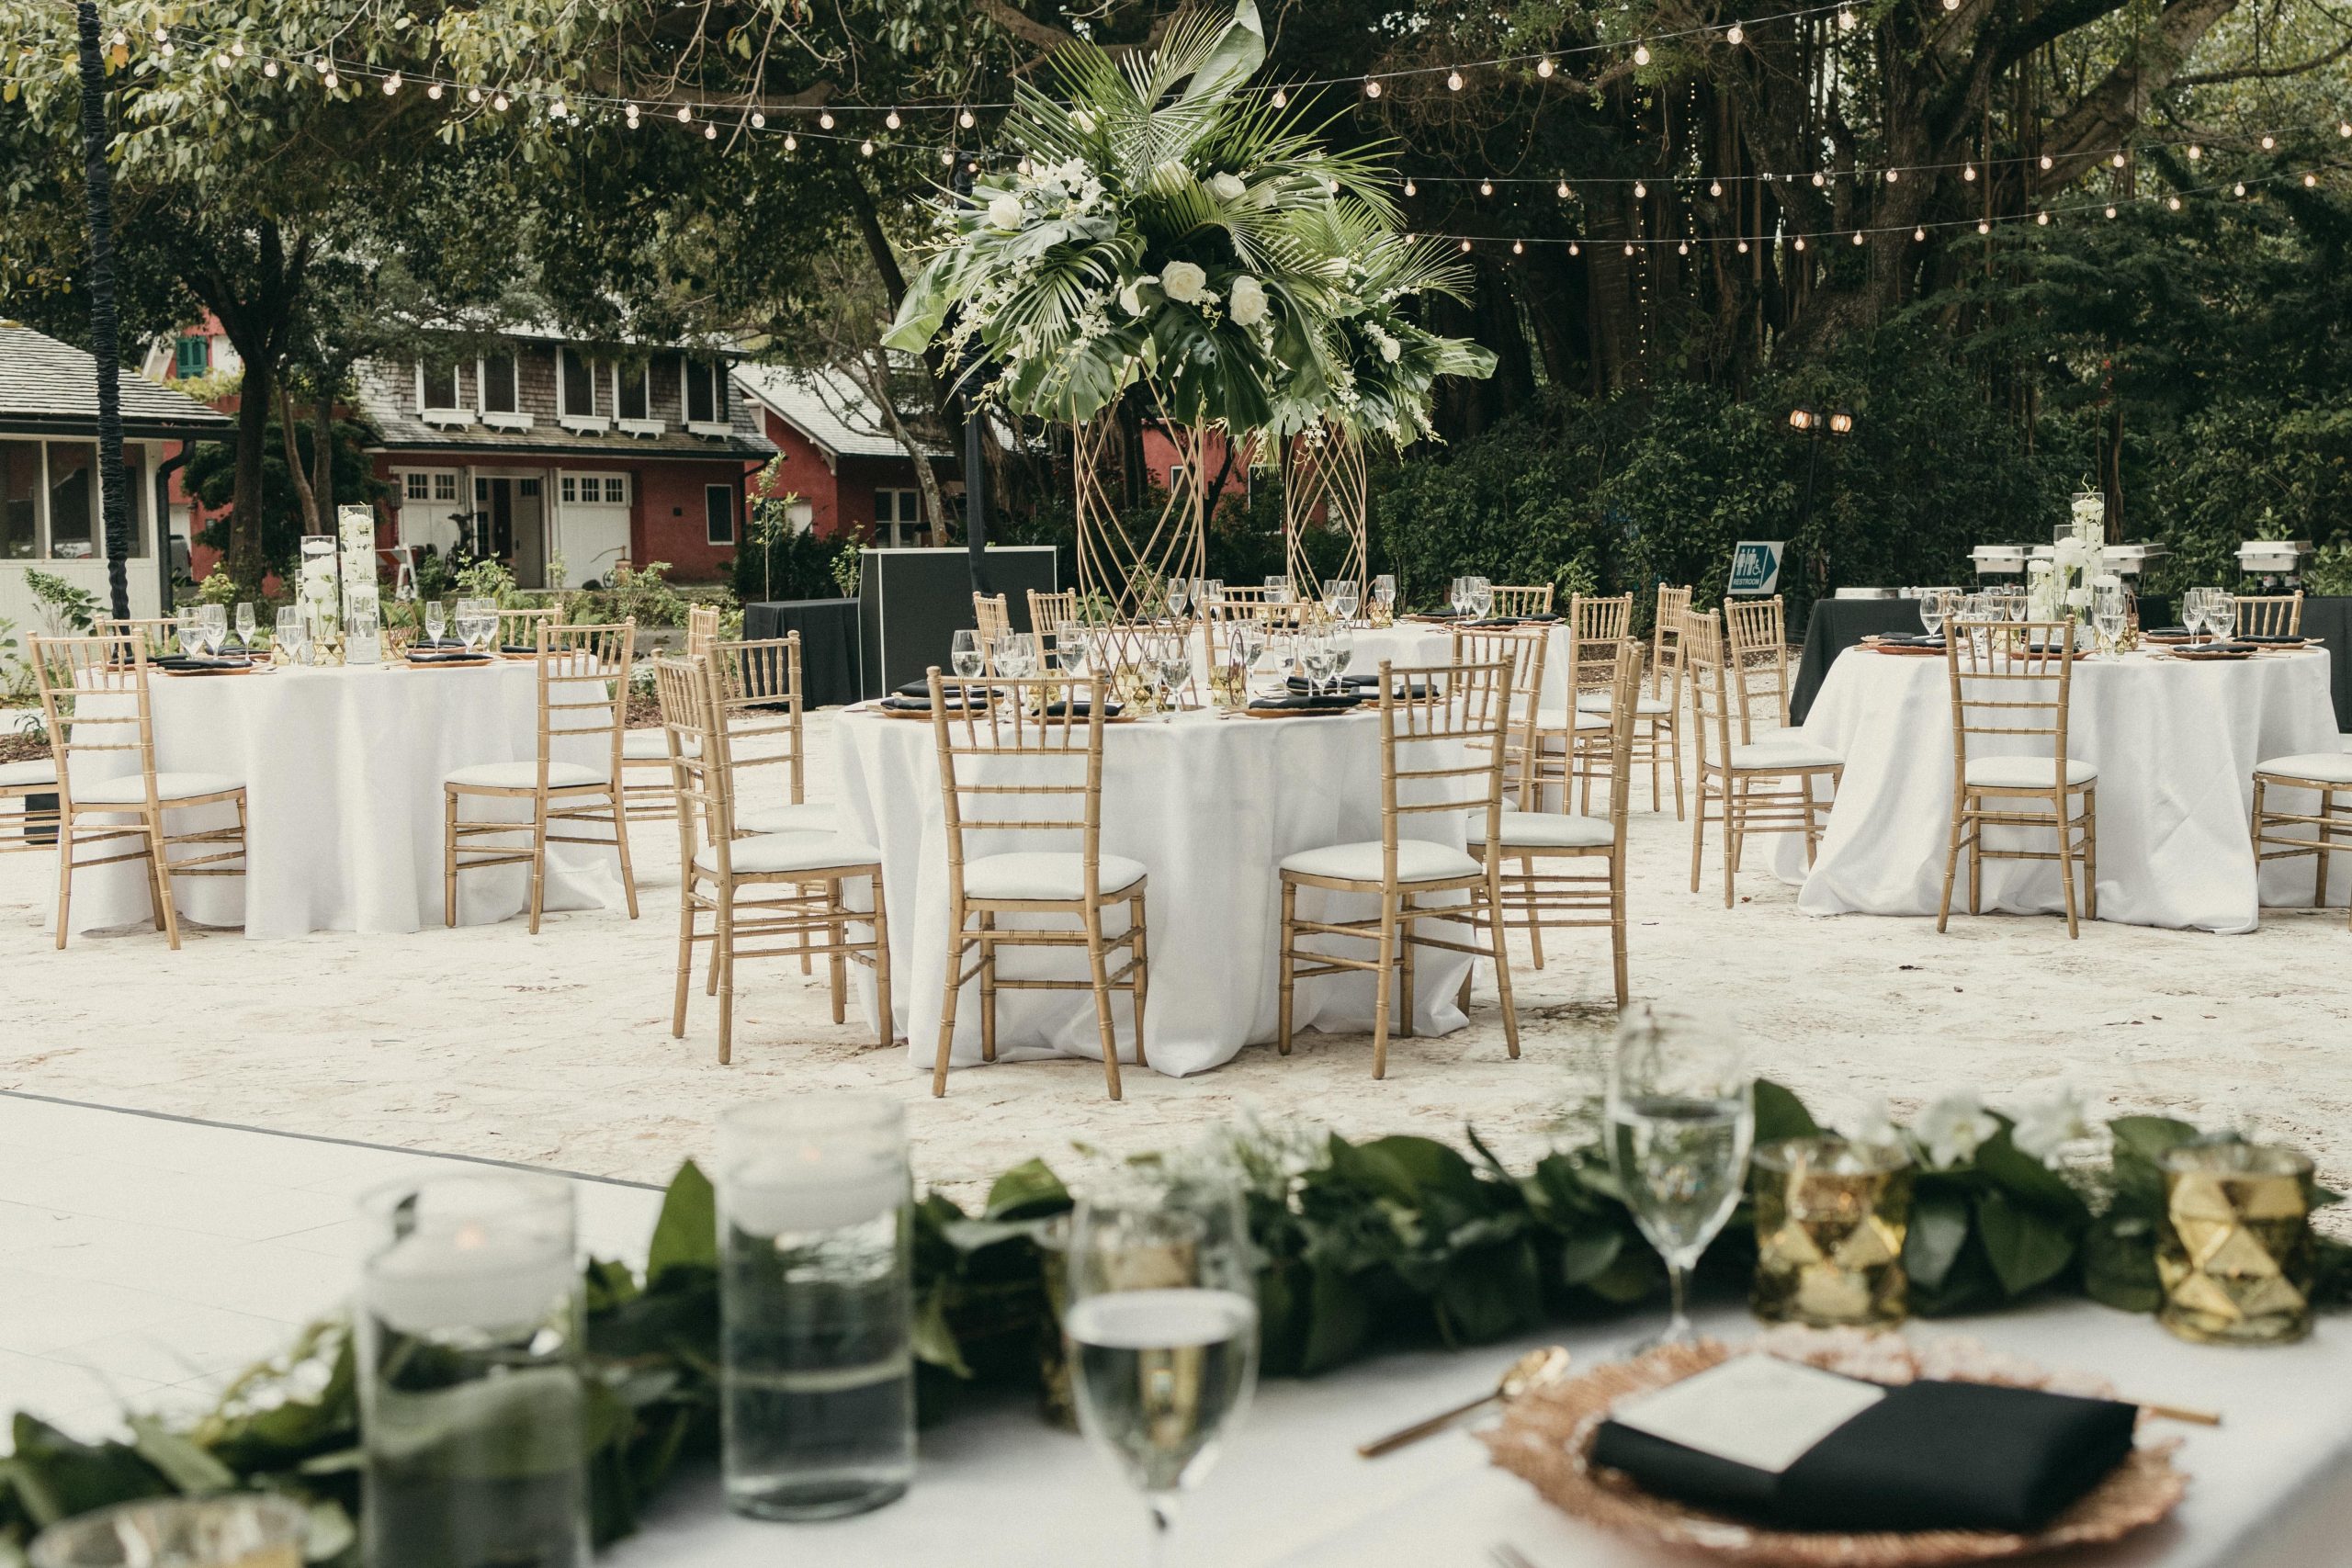 Photo taken from the grooms' sweetheart's table overlooking the wedding reception set-up at Deering Estate's historic Courtyard